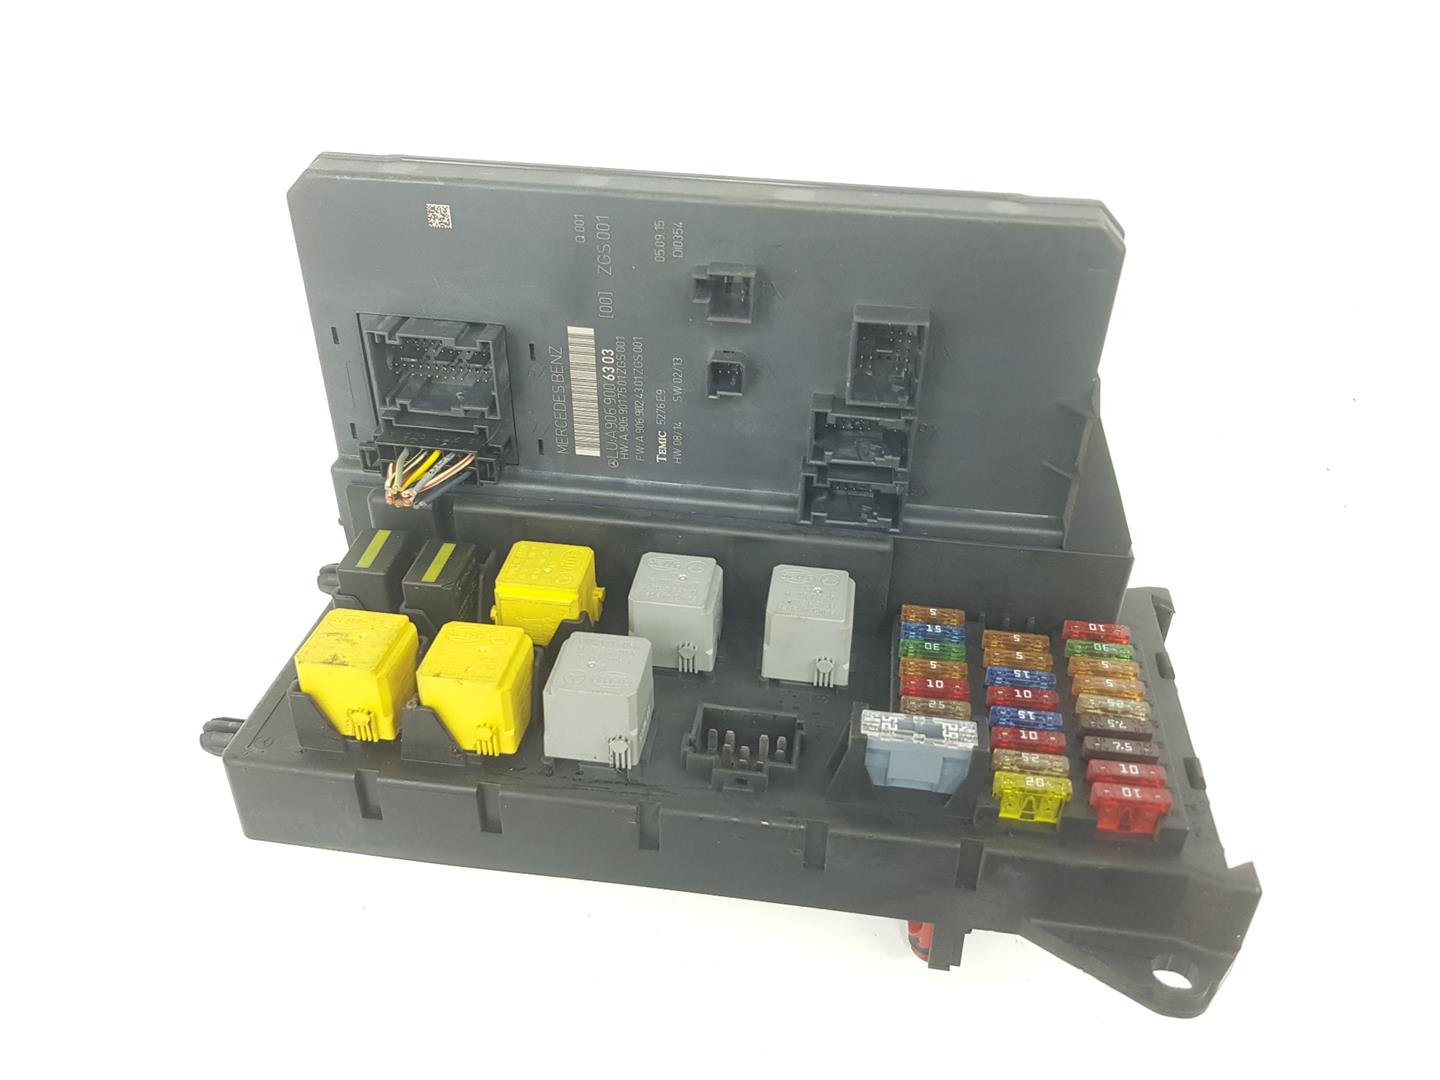 VOLKSWAGEN Crafter 1 generation (2006-2016) Fuse Box A9069006303, 2E0937615B 24252863